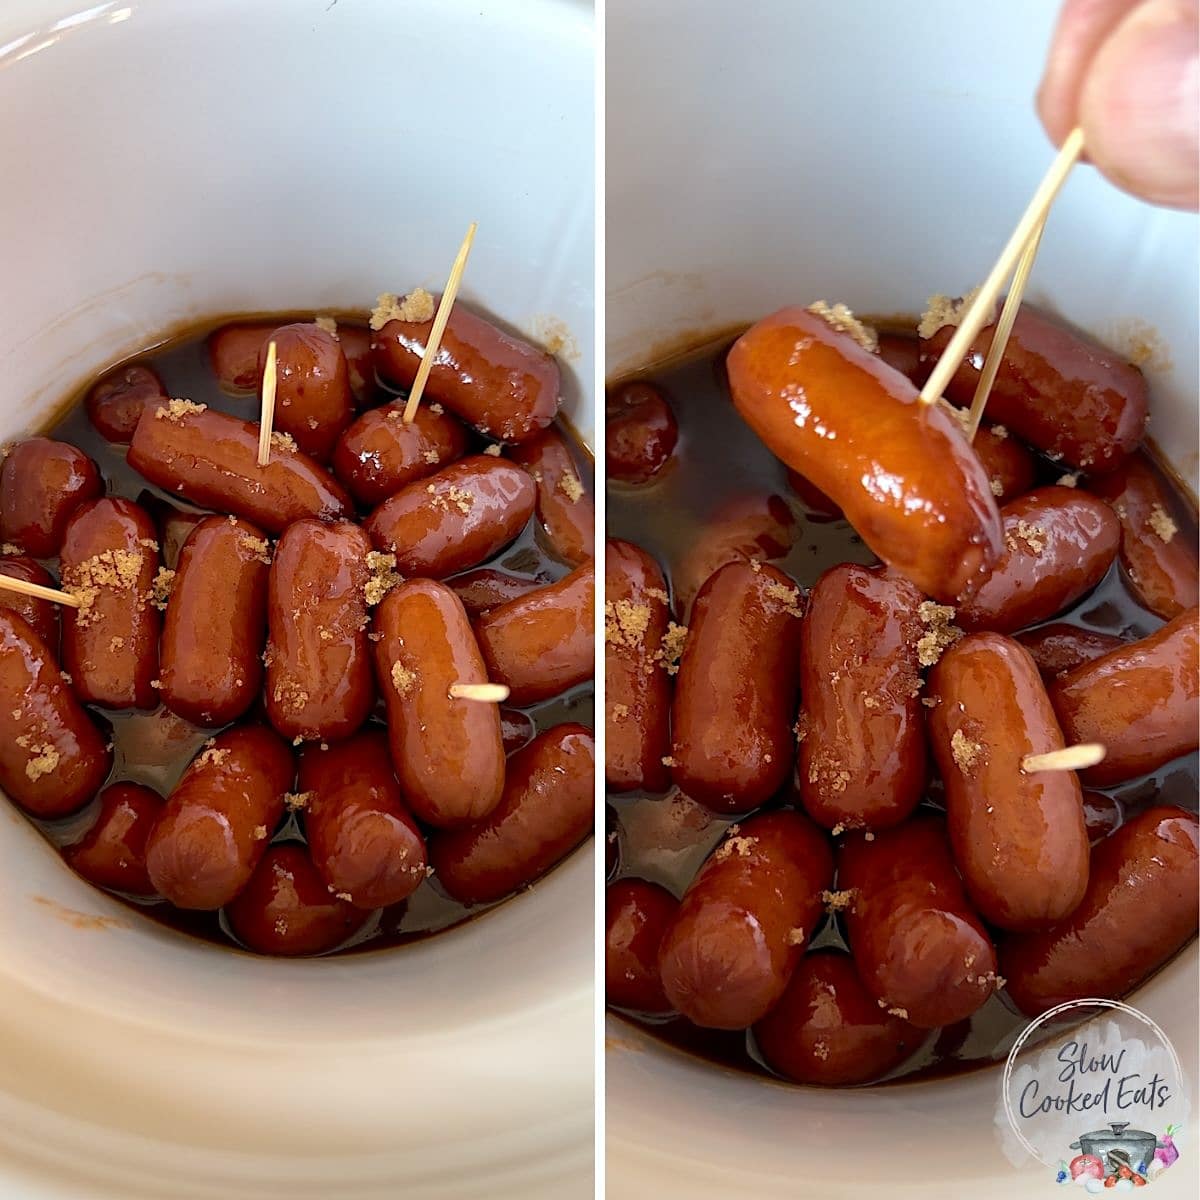 Picking up little smokies in crockpot with a toothpick.